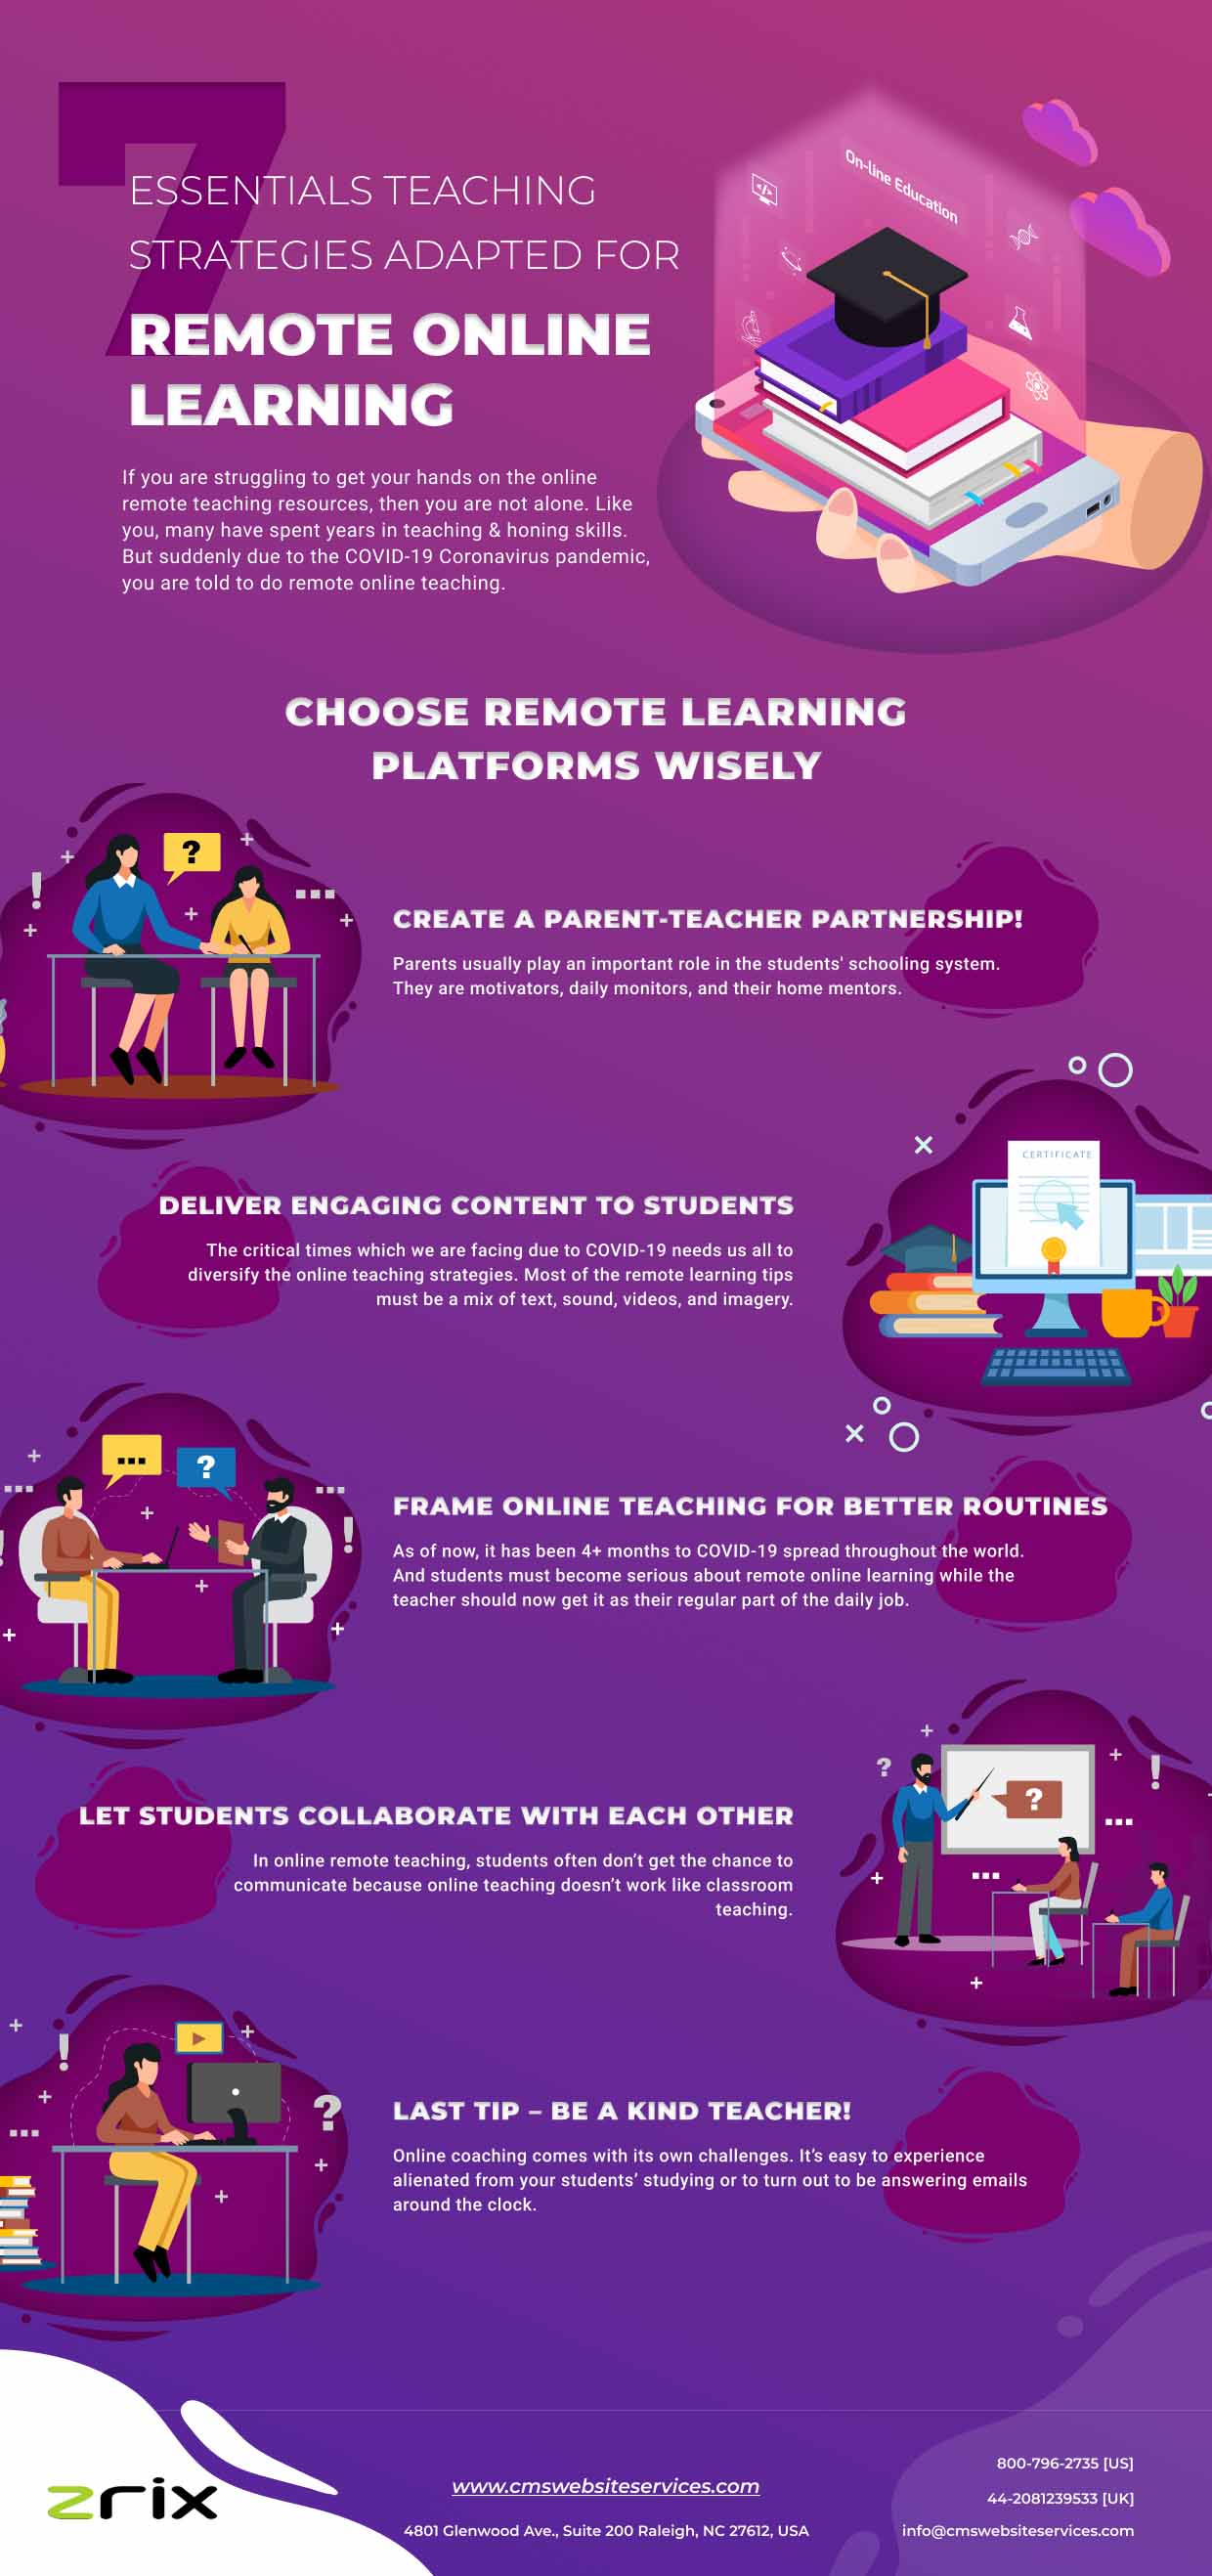 Teaching Strategies Adapted for Remote Online Learning